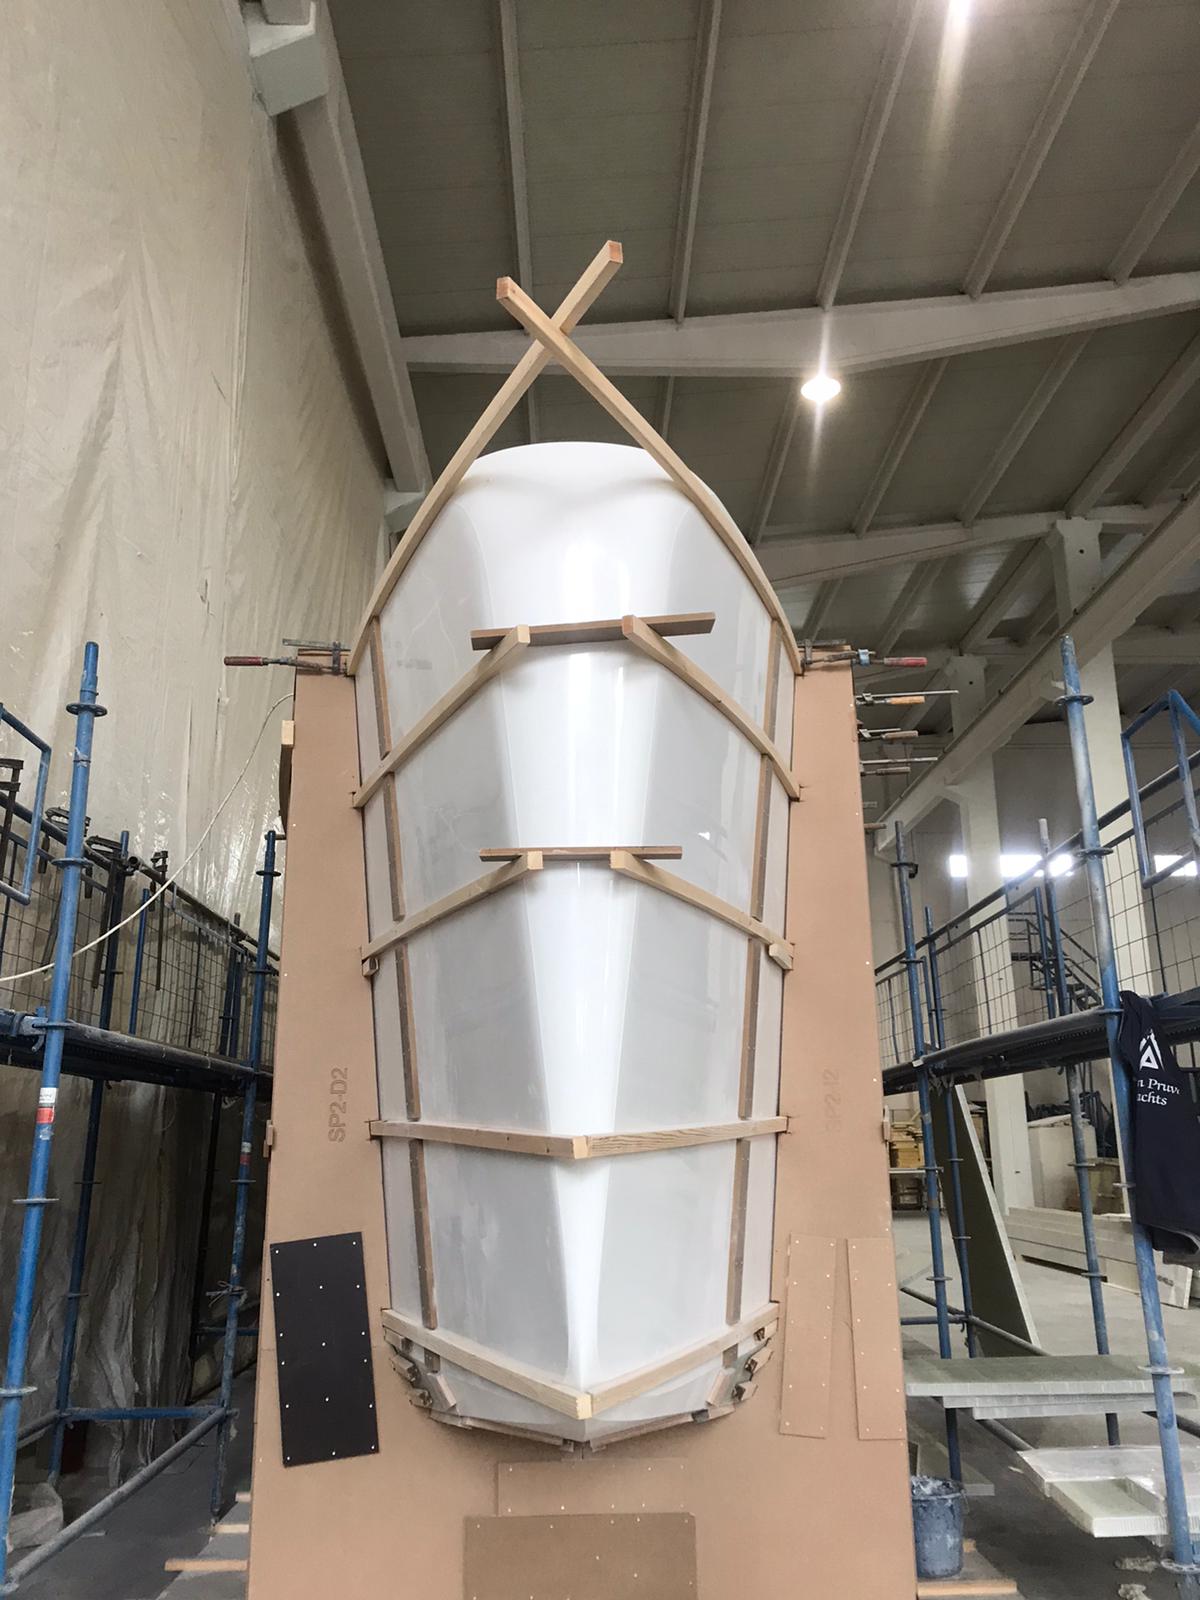 Ocean Beast Hull Ready To Be Mounted